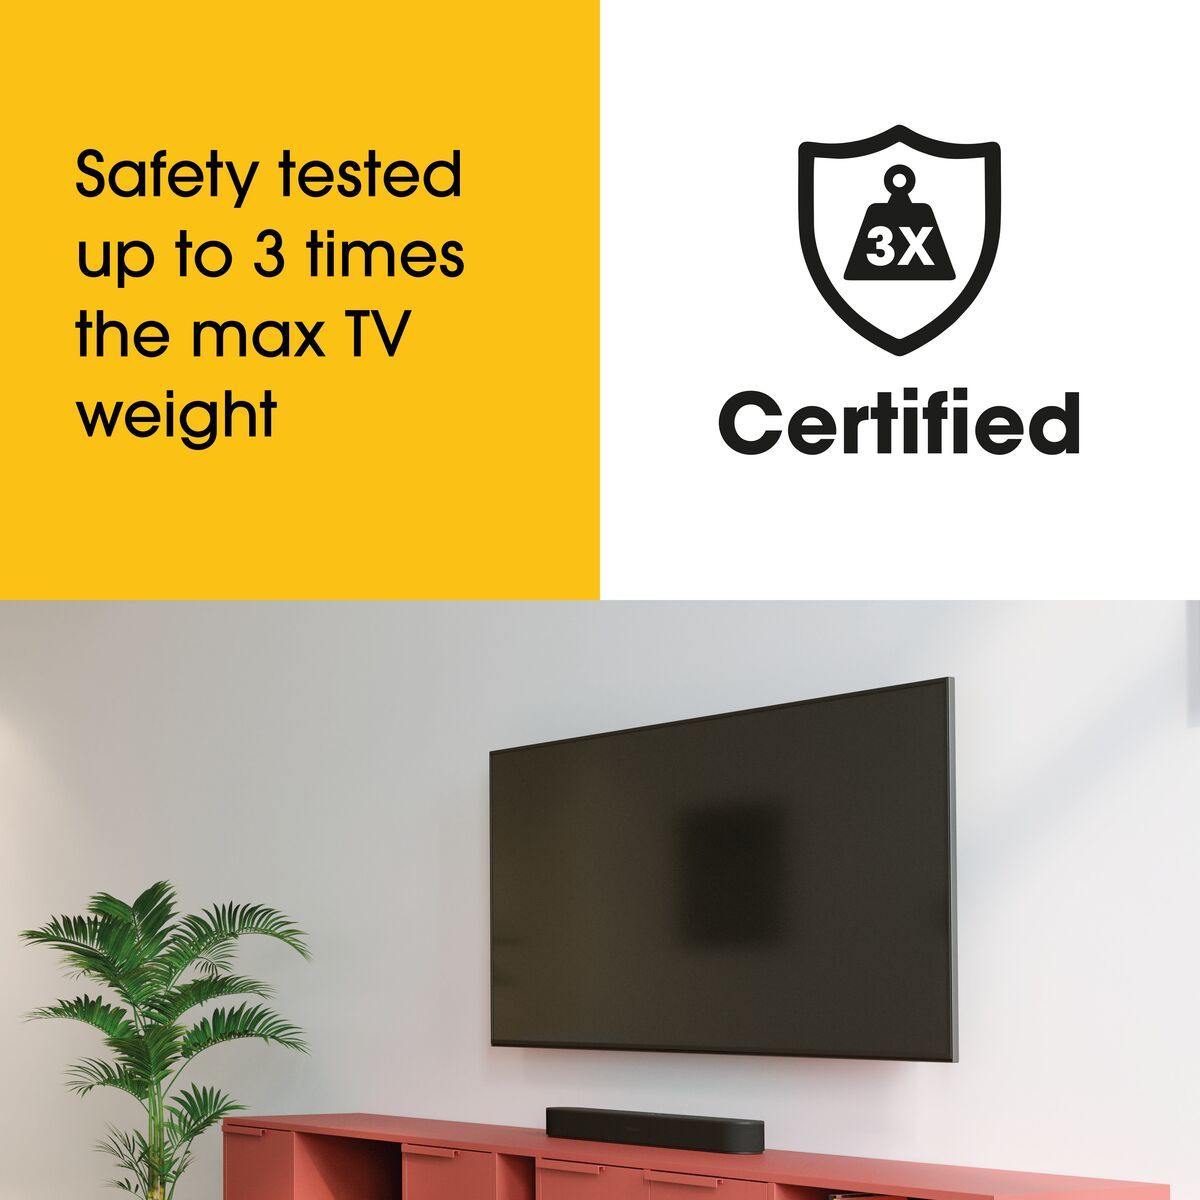 Vogel's MA4040 Full-Motion TV Wall Mount - Suitable for 40 up to 77 inch TVs - Full motion (up to 180°) - Tilt up to 10° - USP